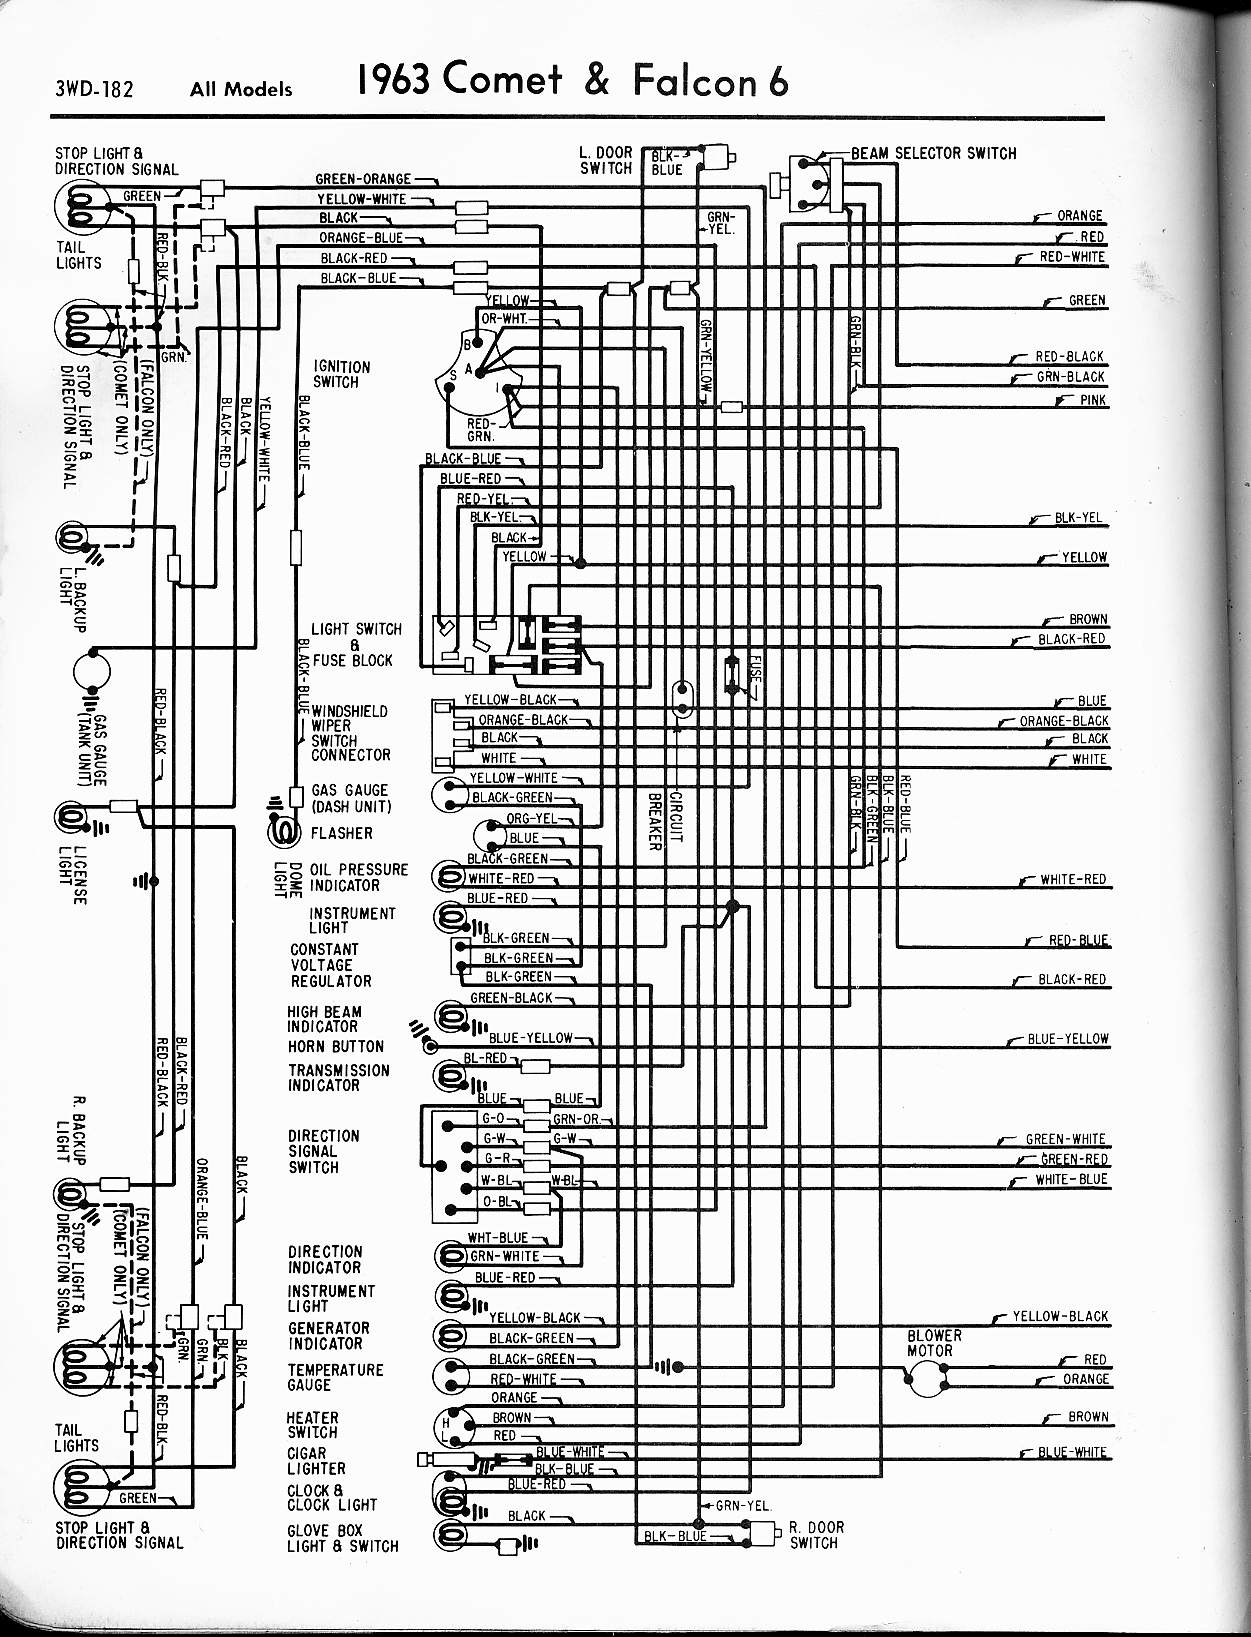 57-65 Ford Wiring Diagrams  Au Falcon Wiring Diagram Pdf    The Old Car Manual Project